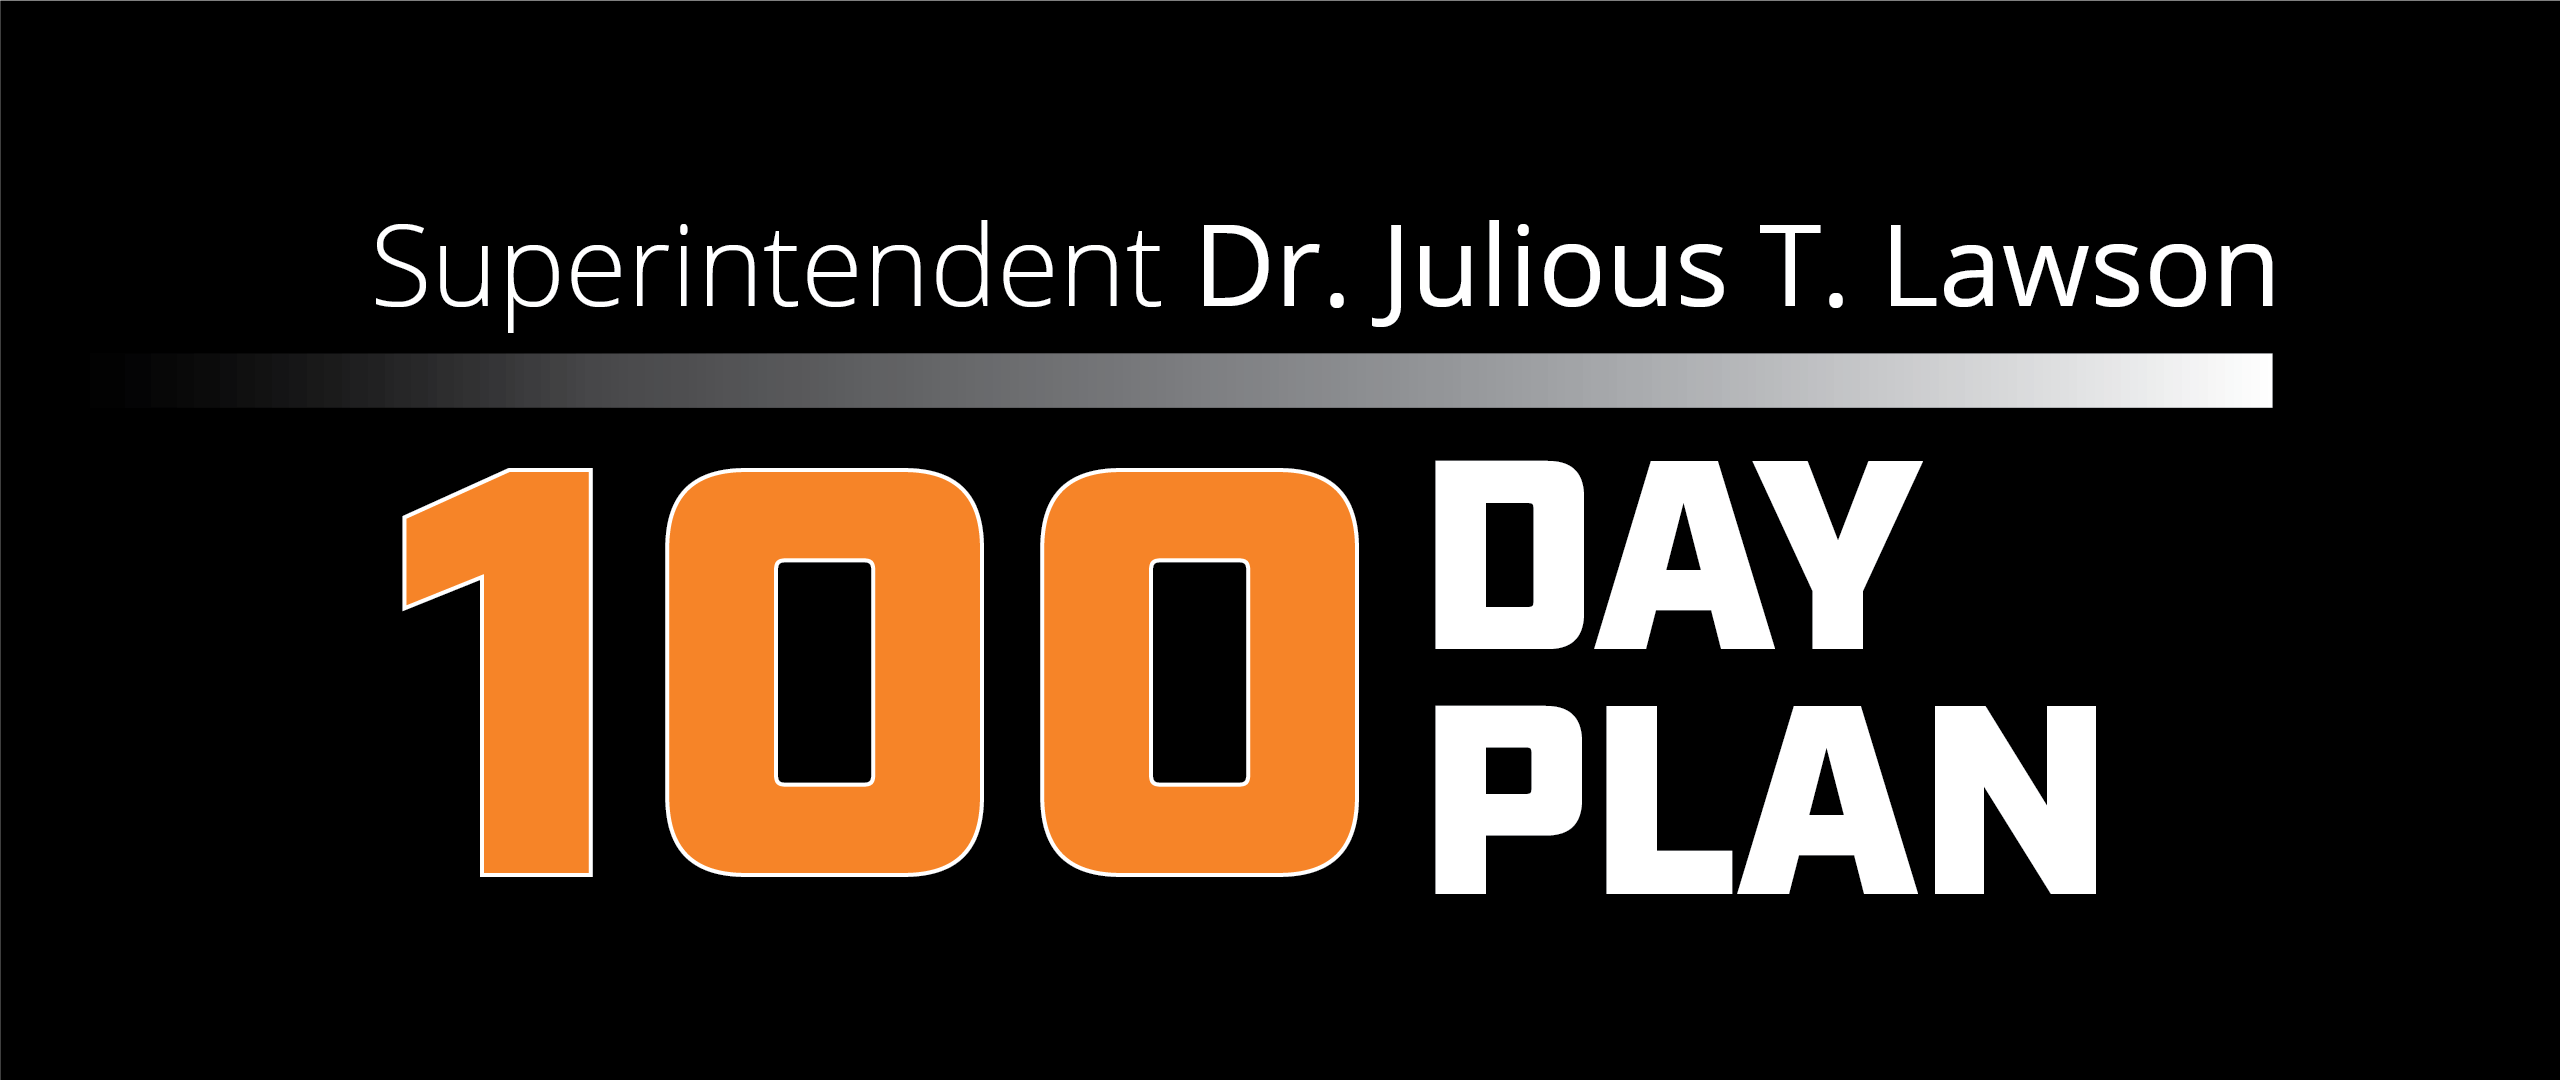 100-Day Plan from Superintendent Dr. Julious Lawson